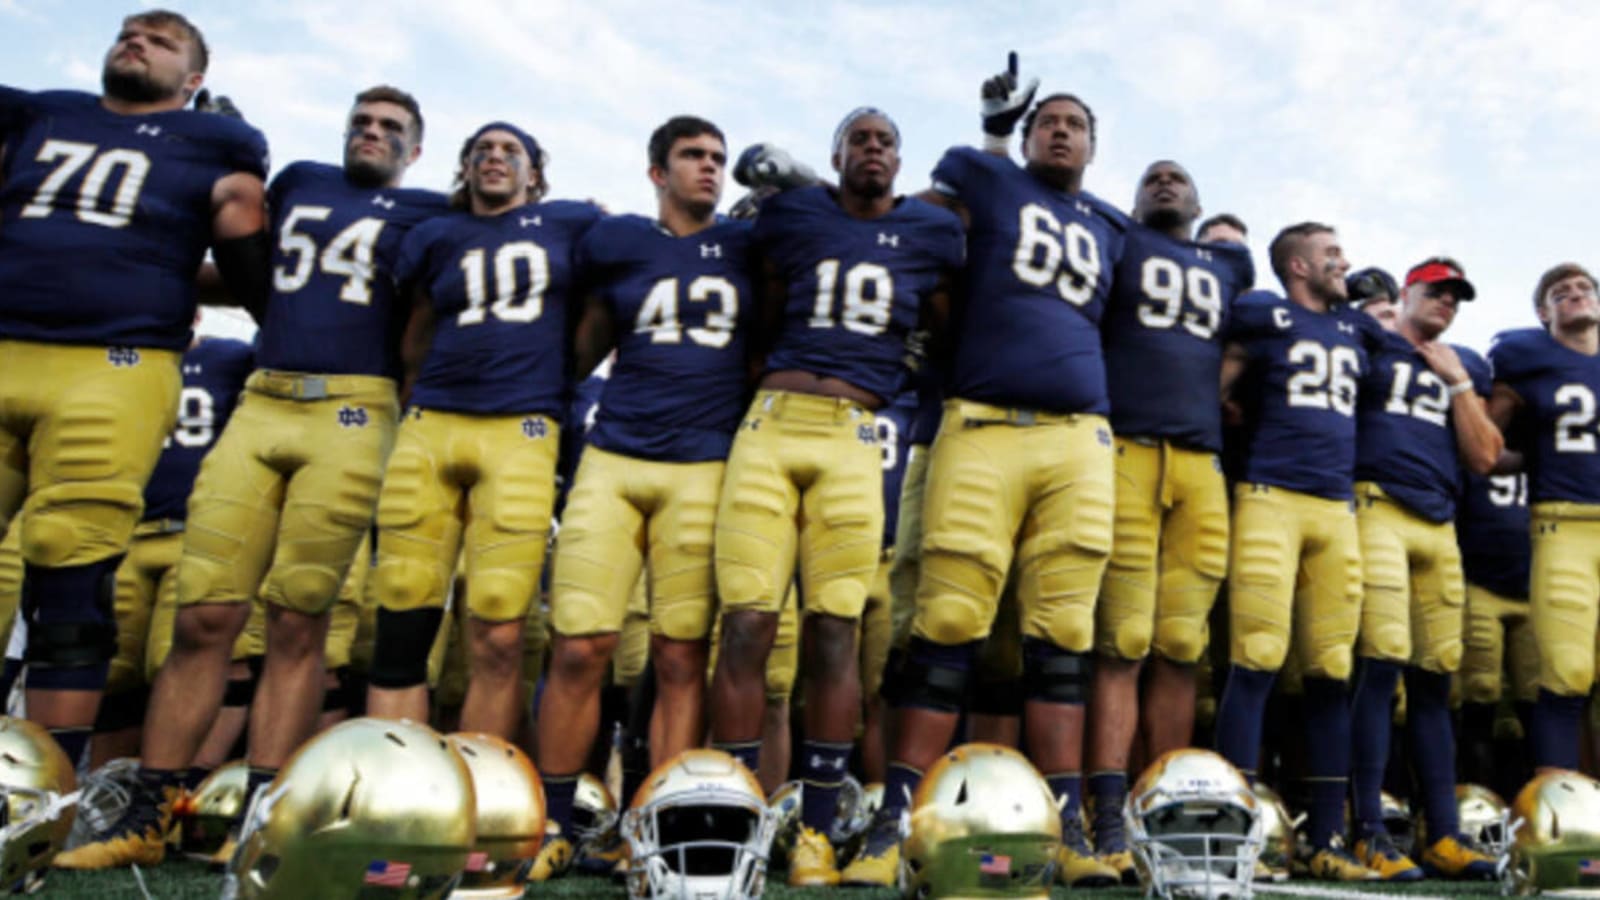 Will Notre Dame join a football conference? One analyst says it will